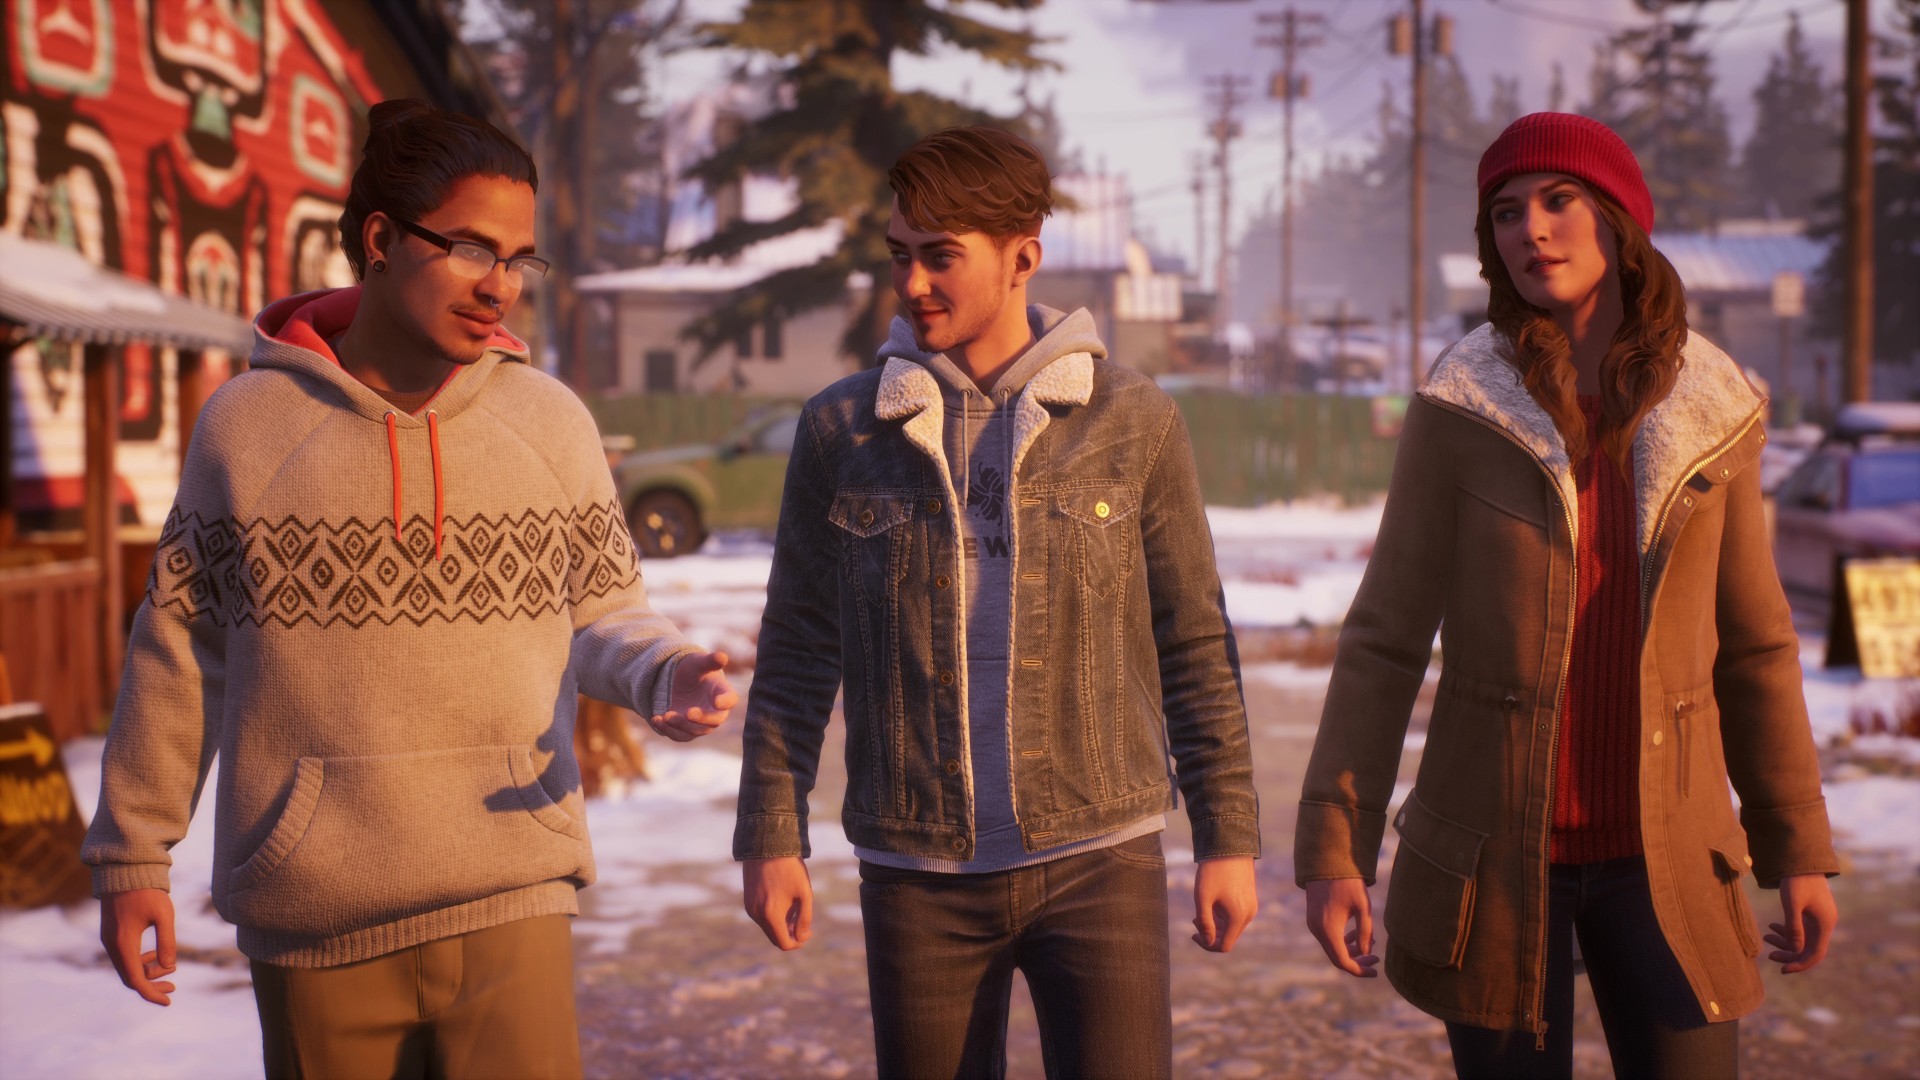 Michael, a young man wearing a beige knitted sweater, walks next to Tyler and Alyson Ronan in a snowy residential area.